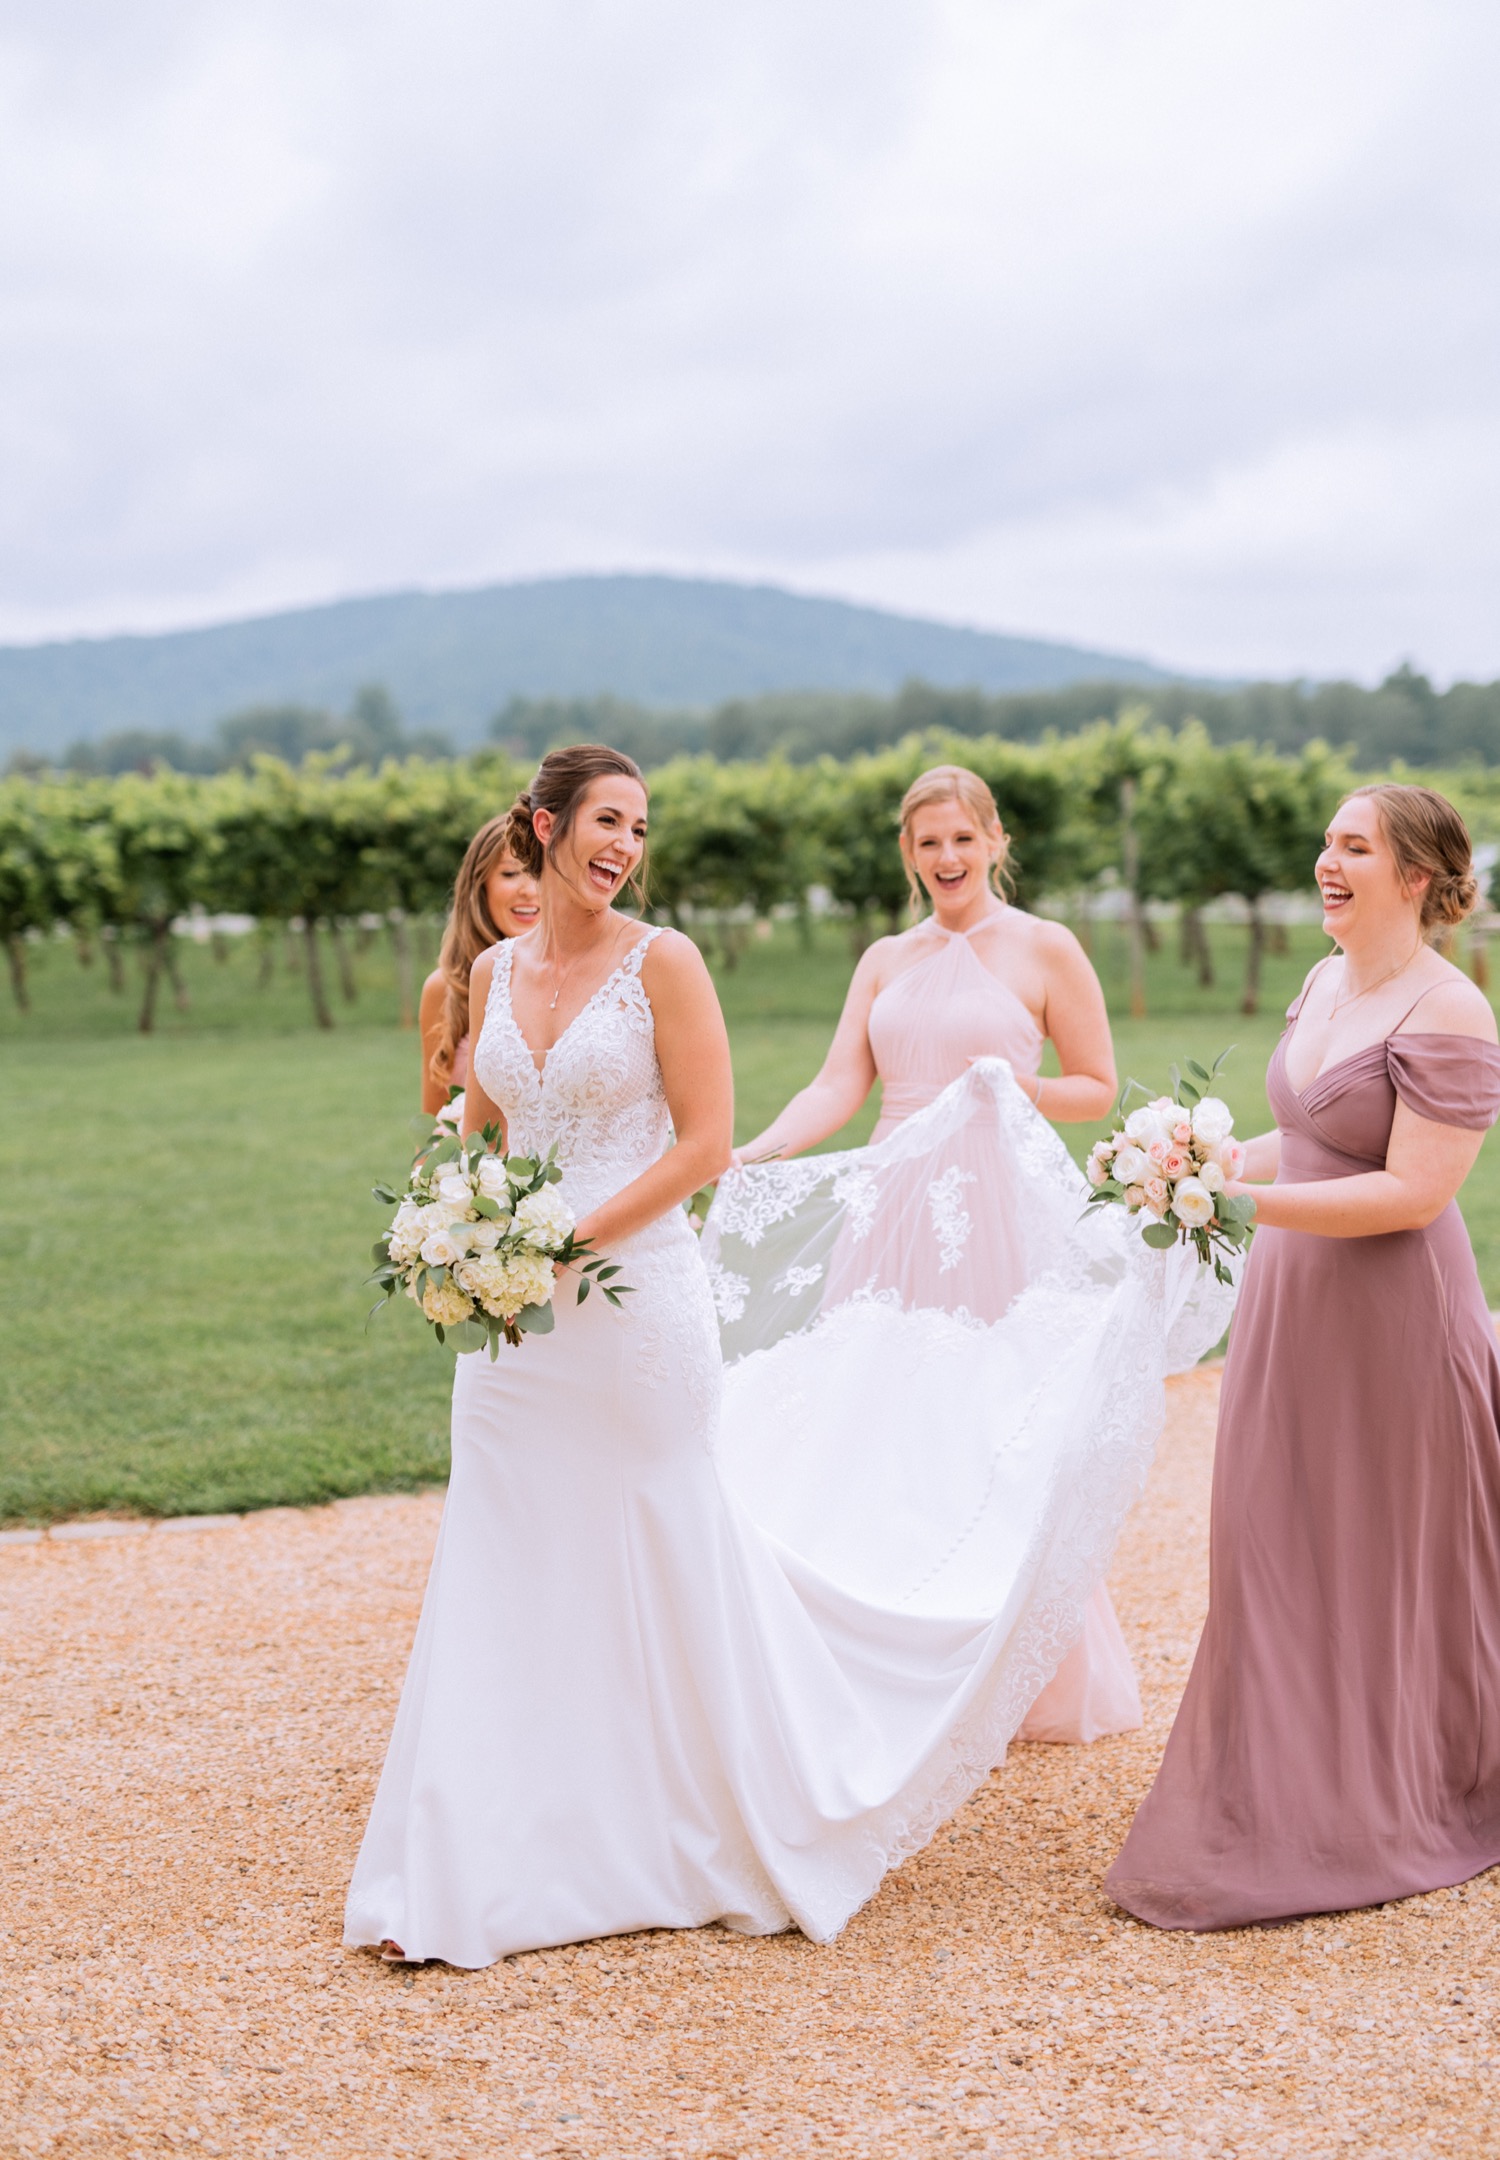 bride and bridal party in mismatching light pink and purple bridesmaids dresses holding white flower arrangements and enjoying themselves